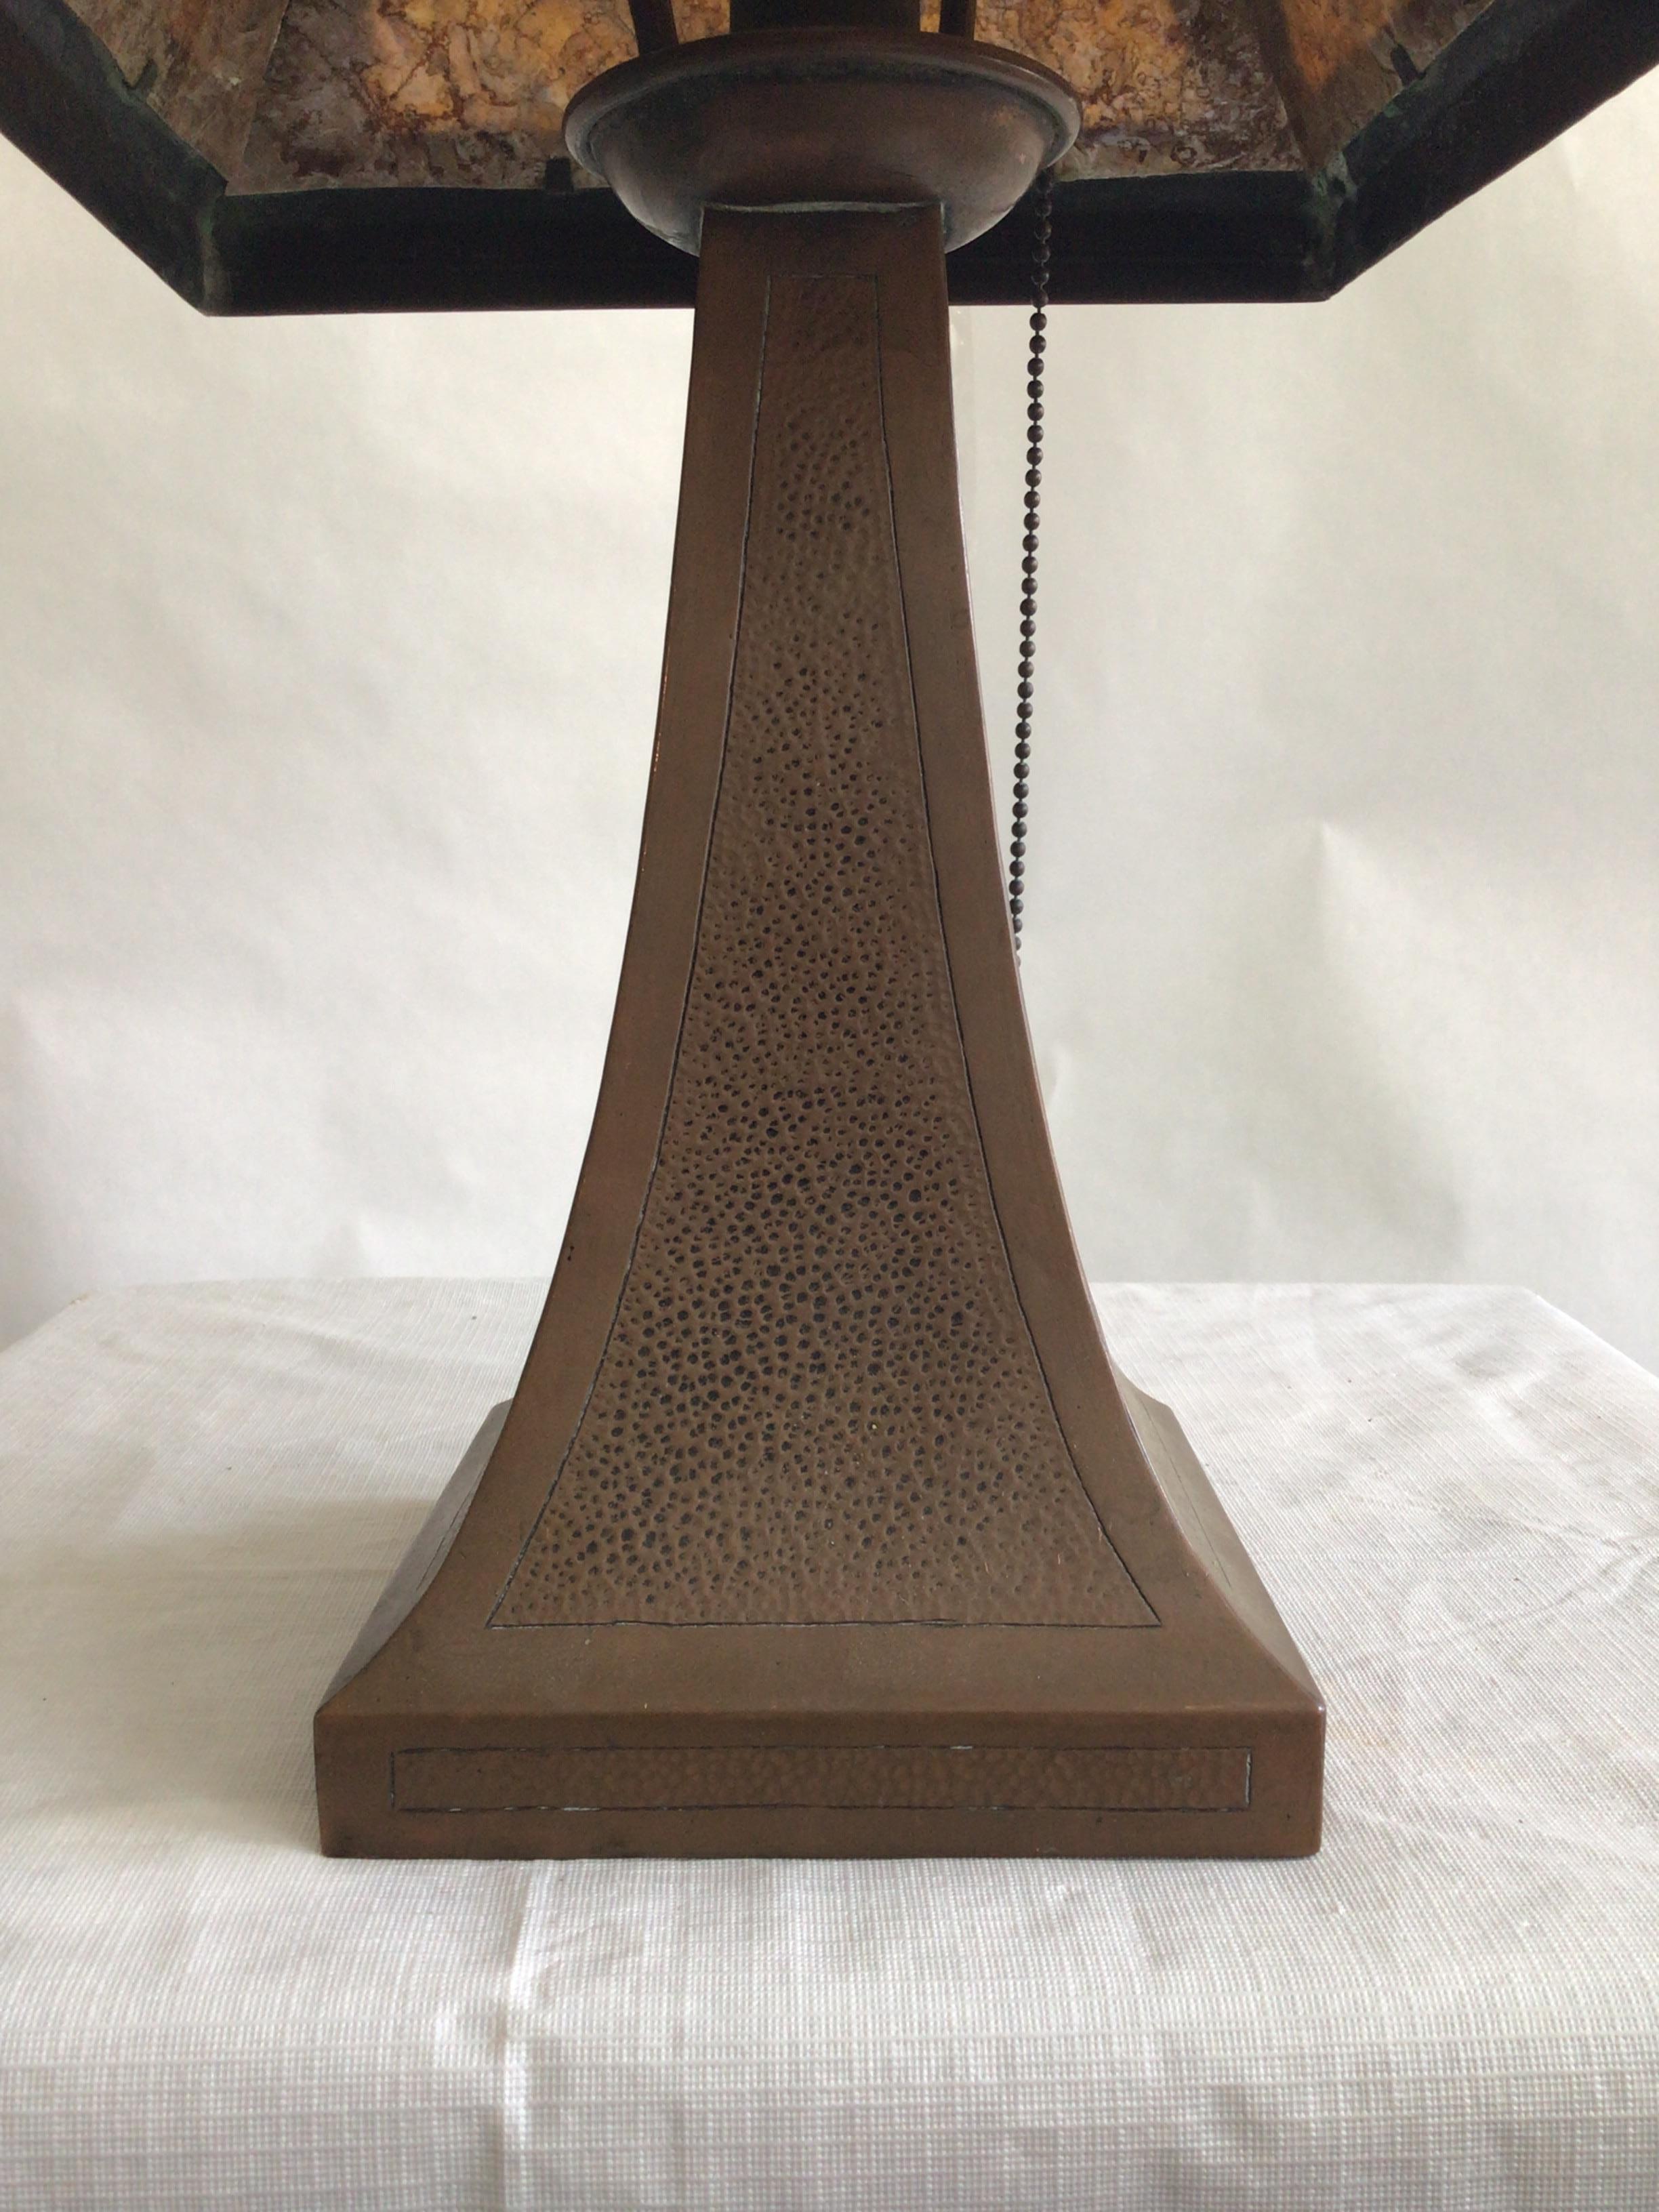 1920s Arts and Crafts Copper Table Lamp With Mica Shade For Sale 6